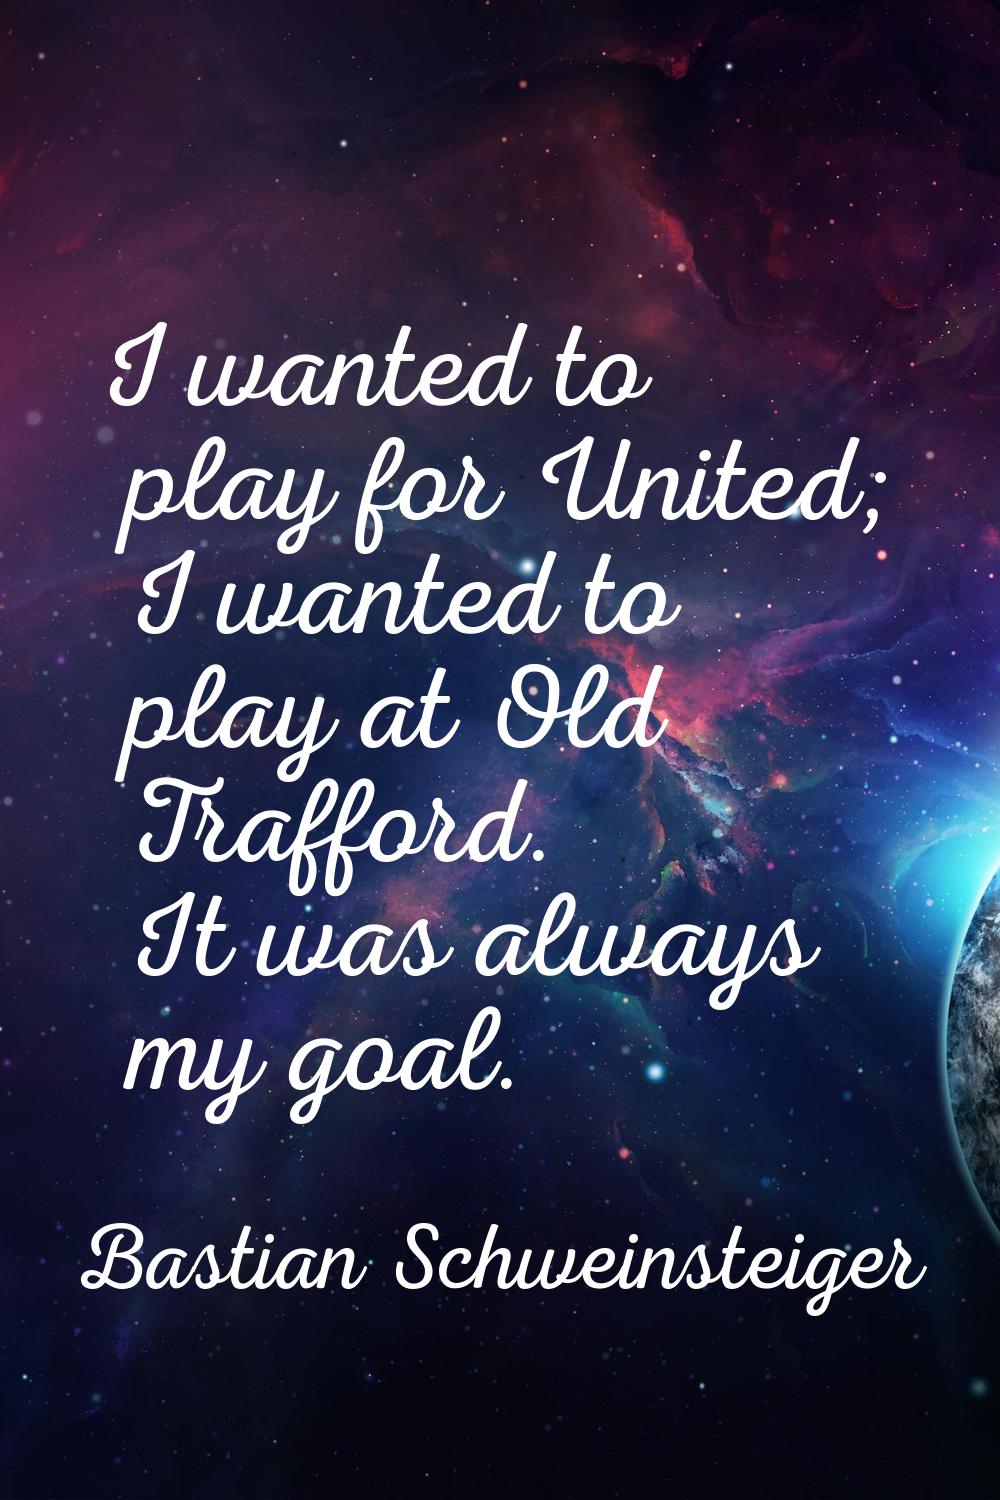 I wanted to play for United; I wanted to play at Old Trafford. It was always my goal.